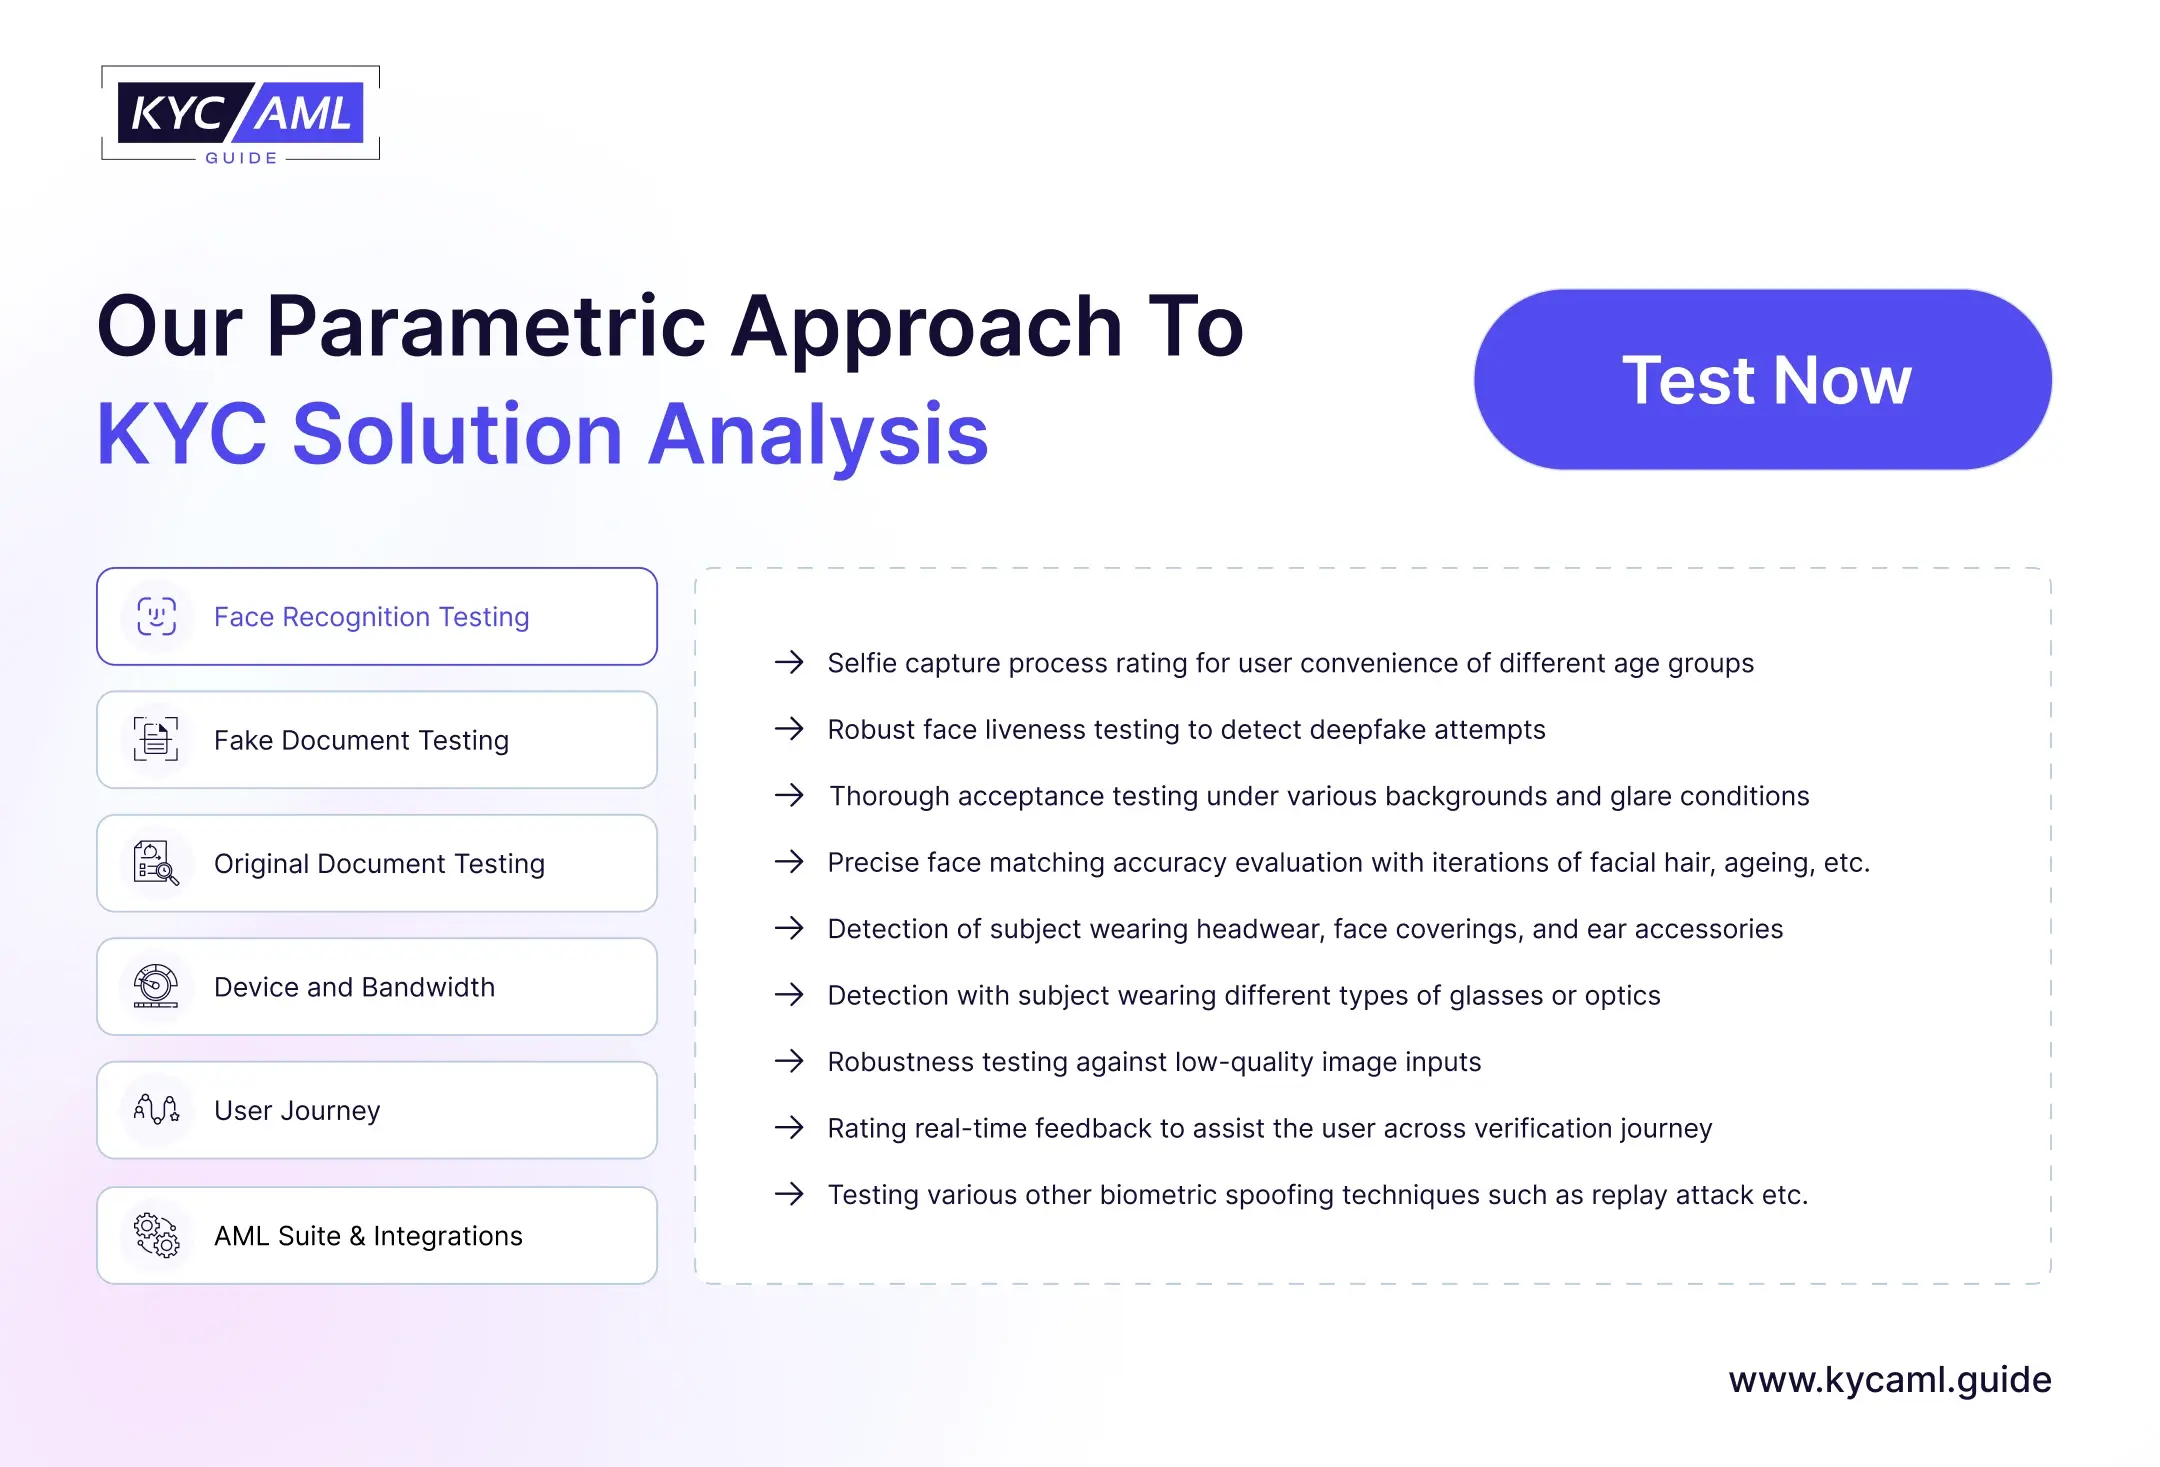 Our Parametric Approach To KYC Solution Analysis